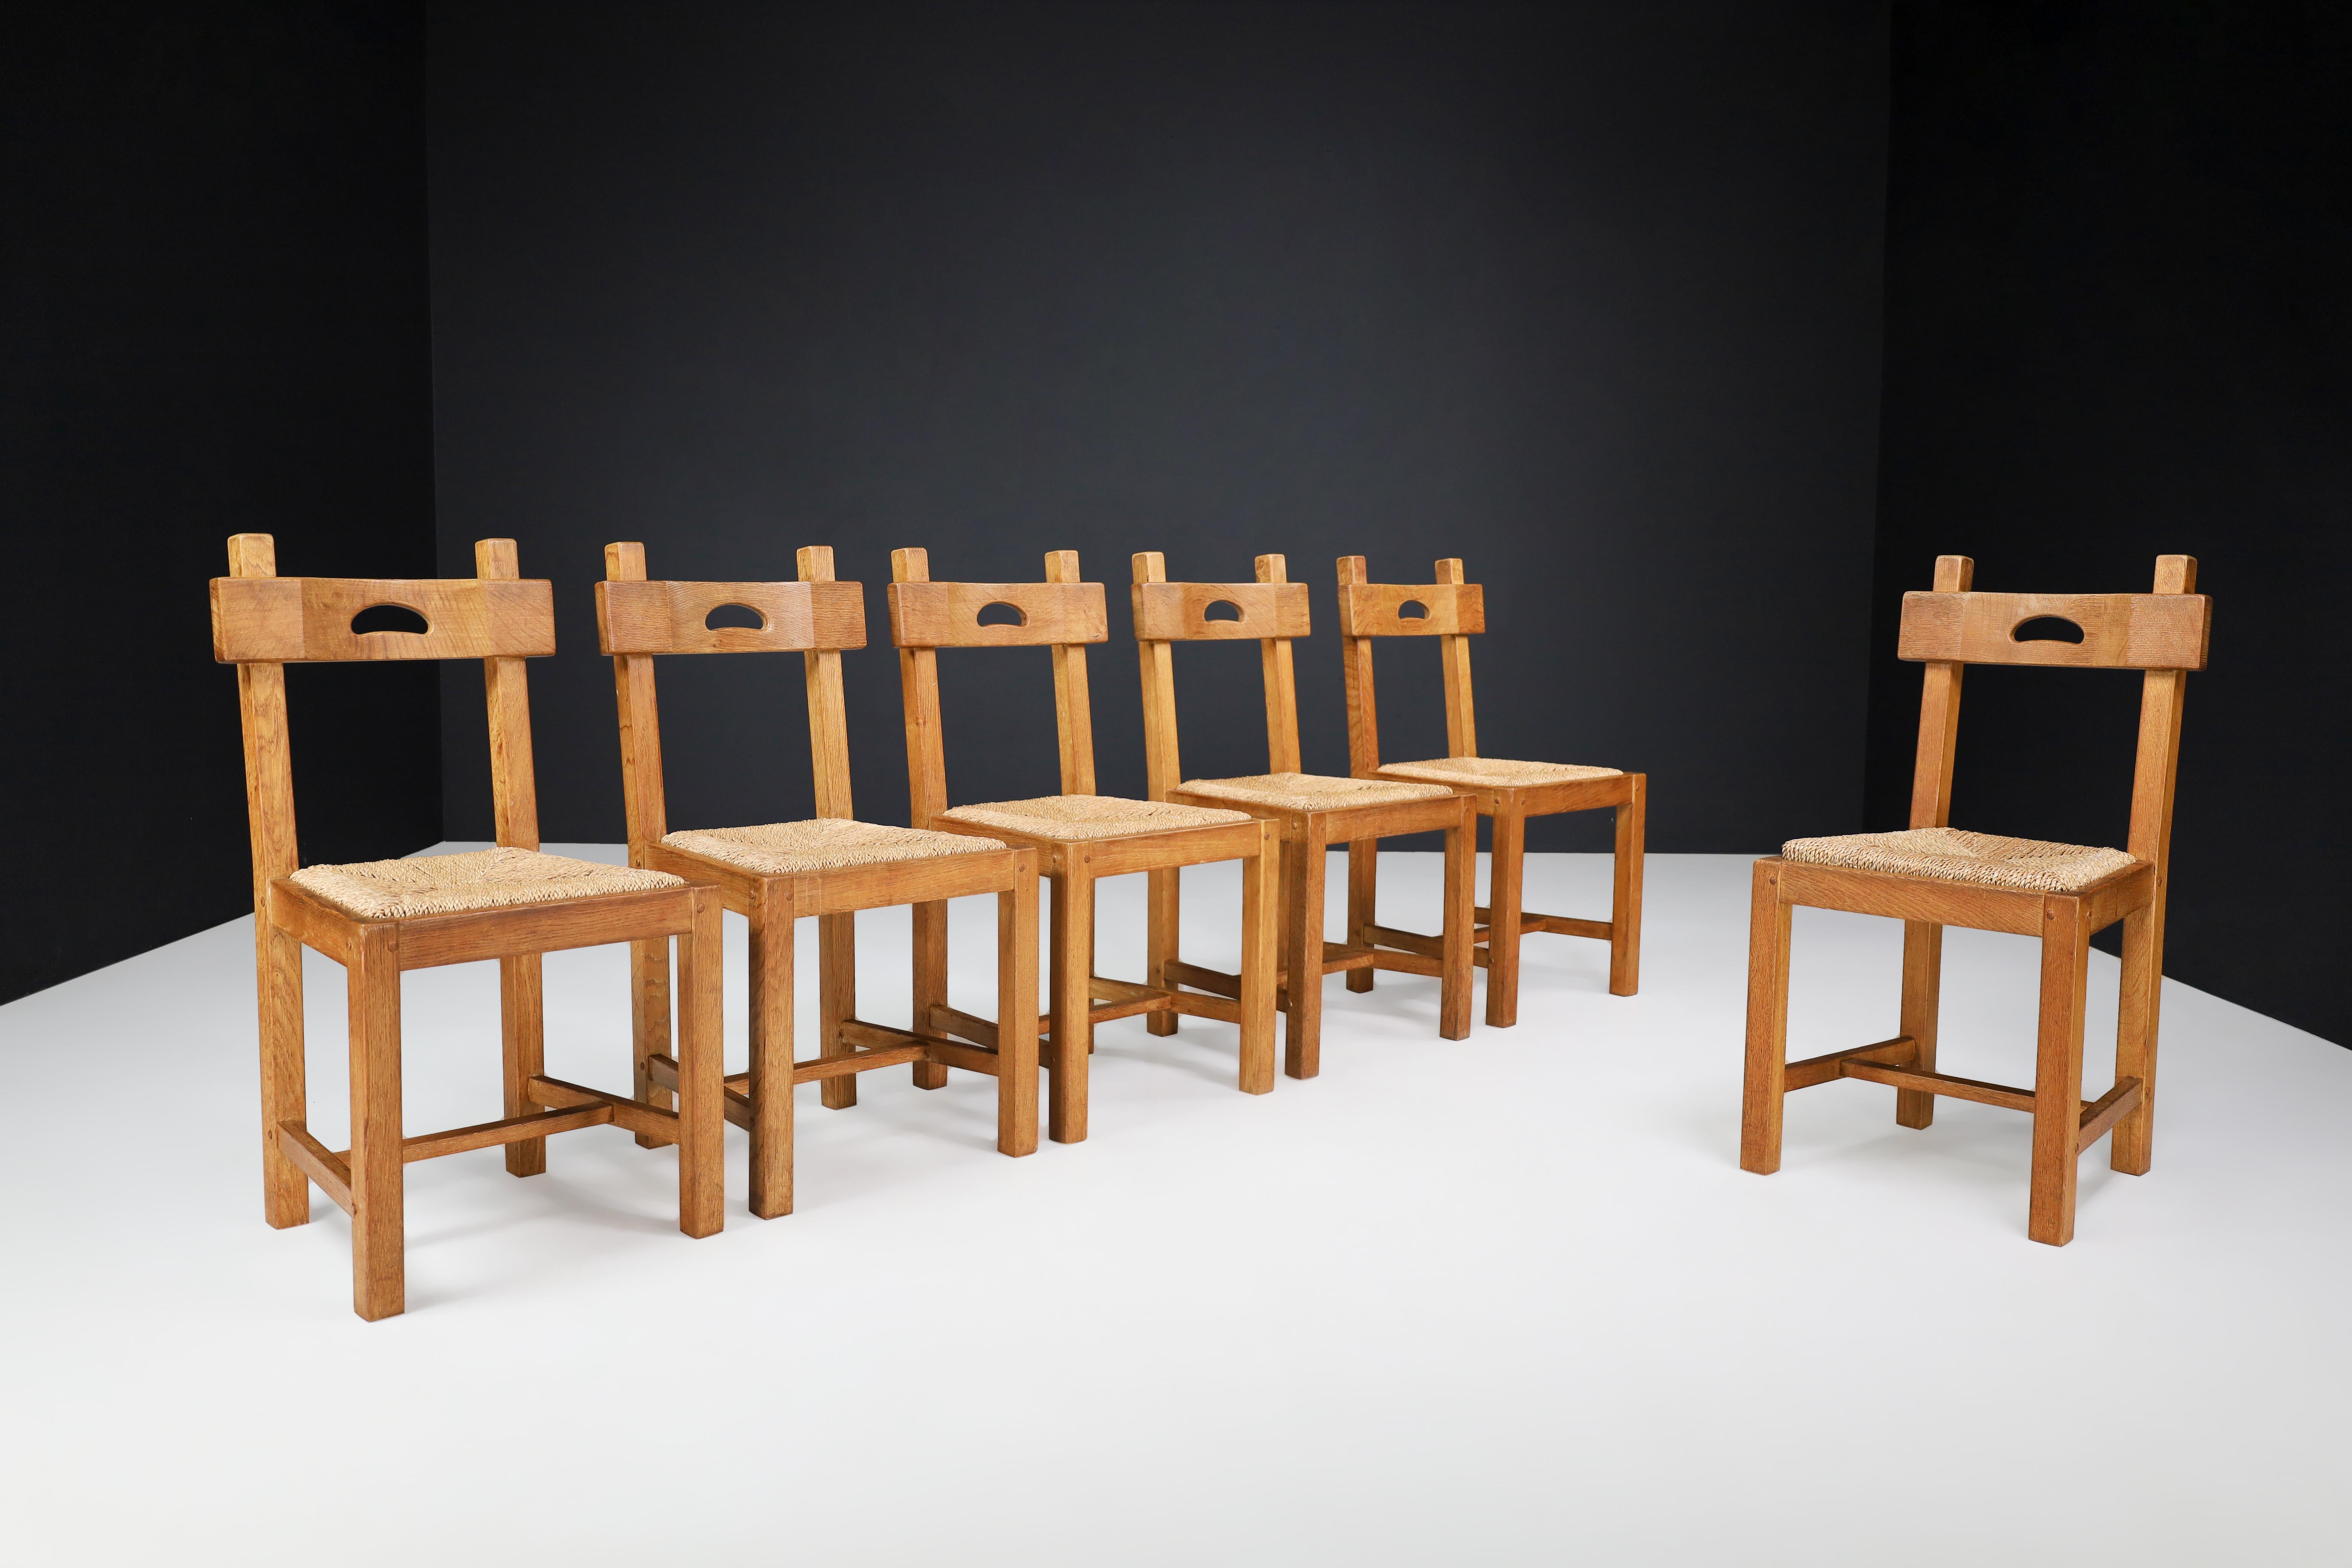 Butralist Dining Chairs in Oak and Rush, France 1960s.

This set of six dining chairs from France, crafted from oakwood and rush in the 1960s, boasts a warm, rich color that has developed a lovely patina over time. The chairs are not only